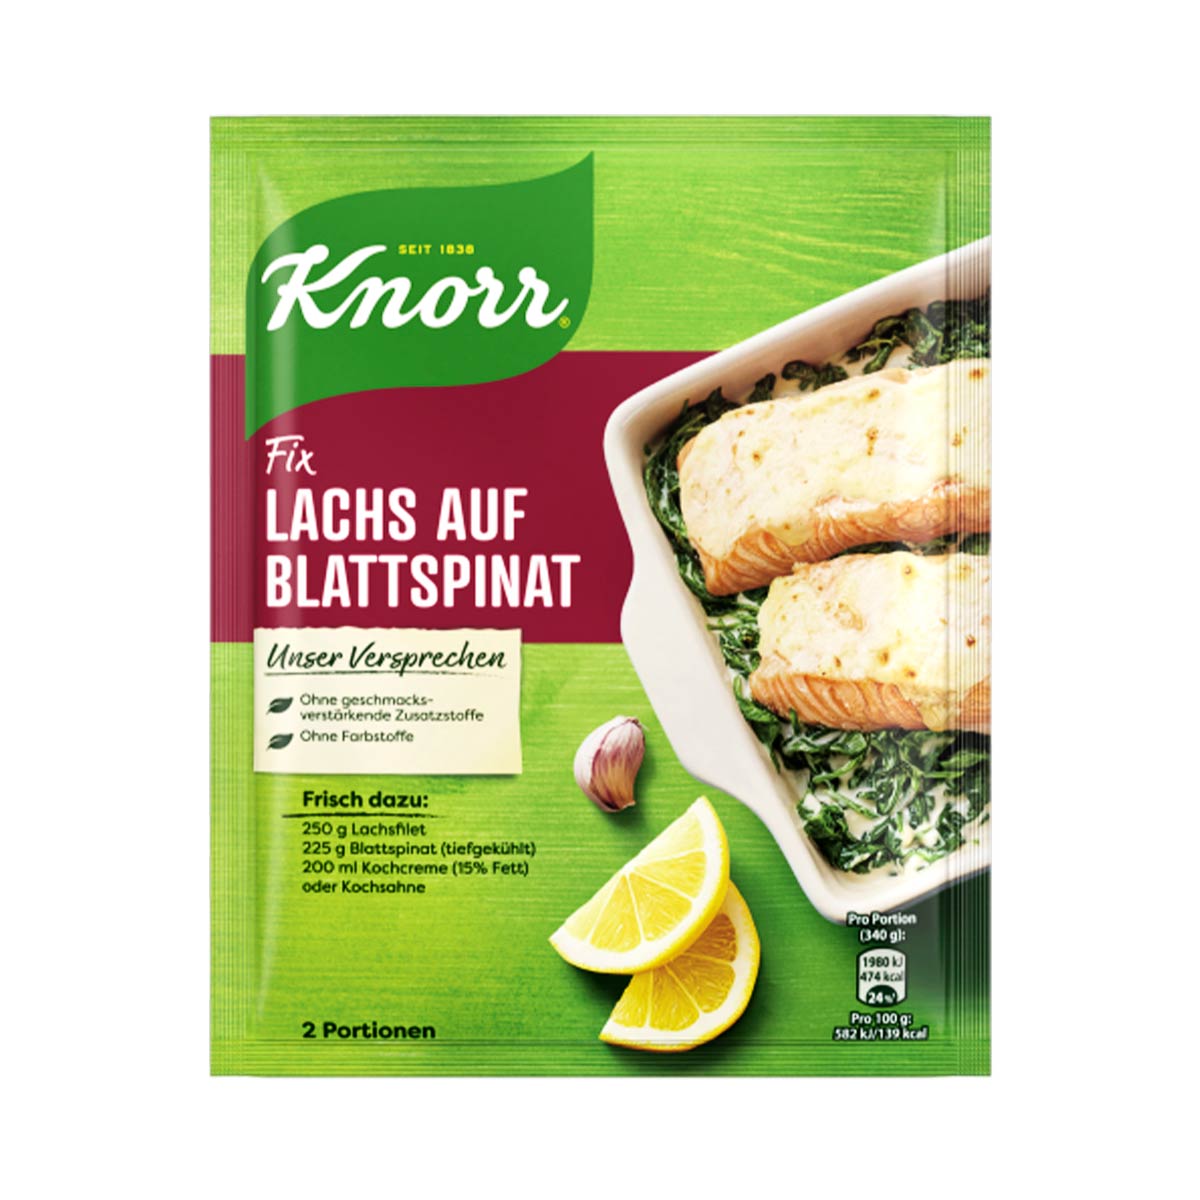 Salmon Fix oz 1 Spinach, g) for Knorr (28 with